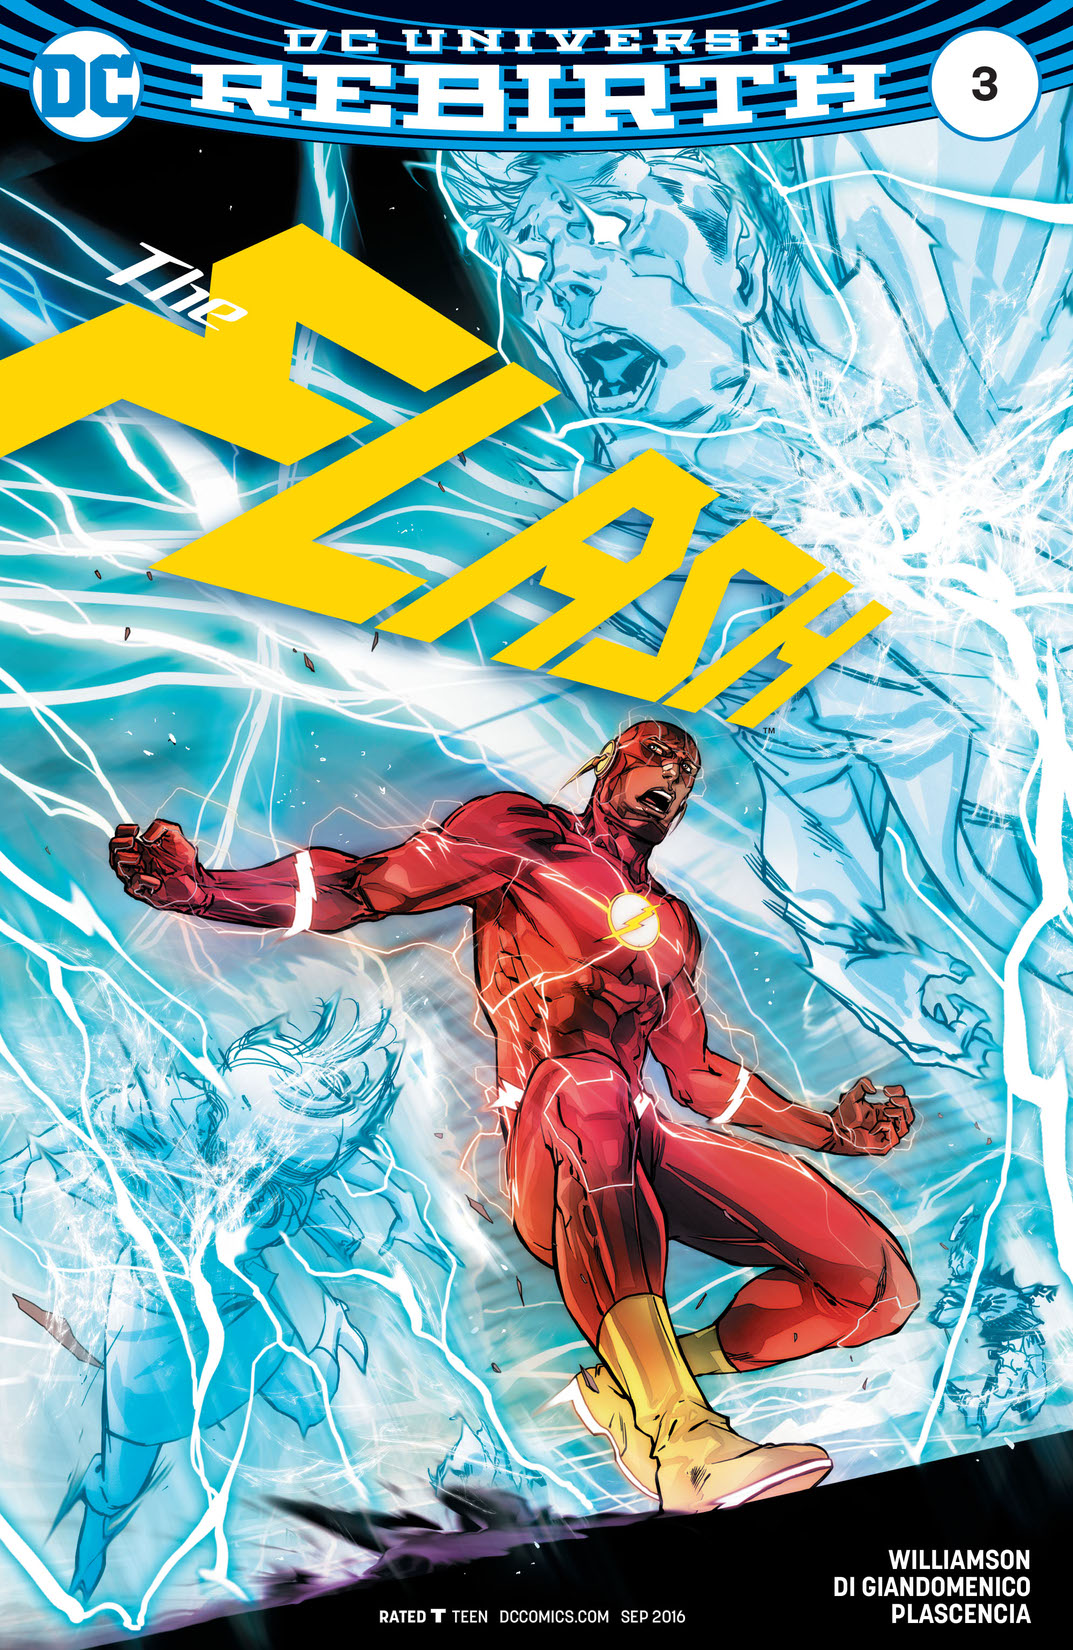 The Flash (2016-) #3 preview images